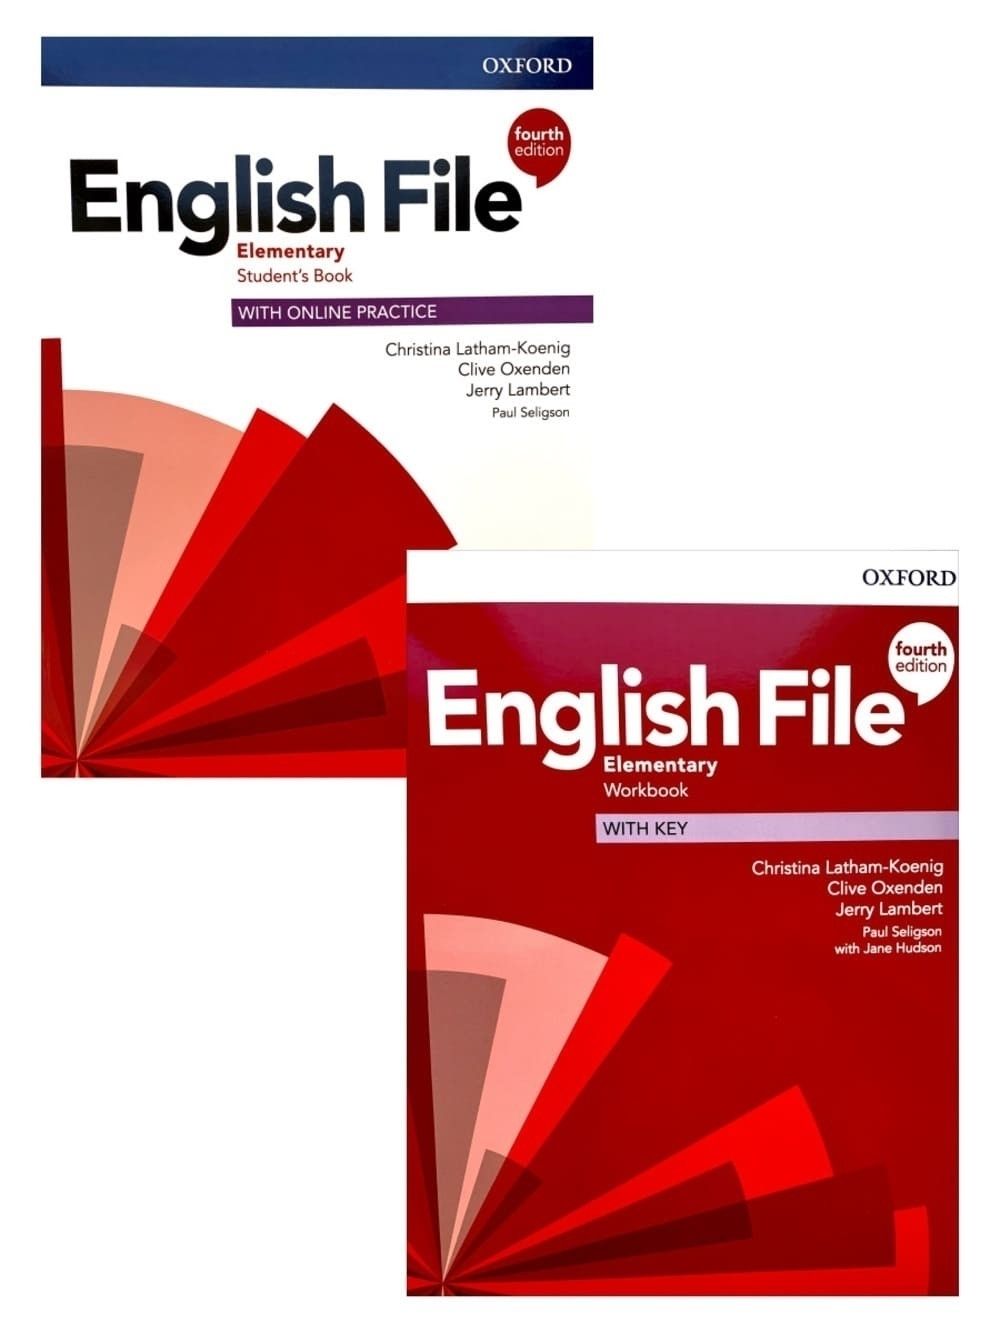 New English file Proficiency. Cambridge 18. Cambridge IELTS реклама. Book Cover for English students download.